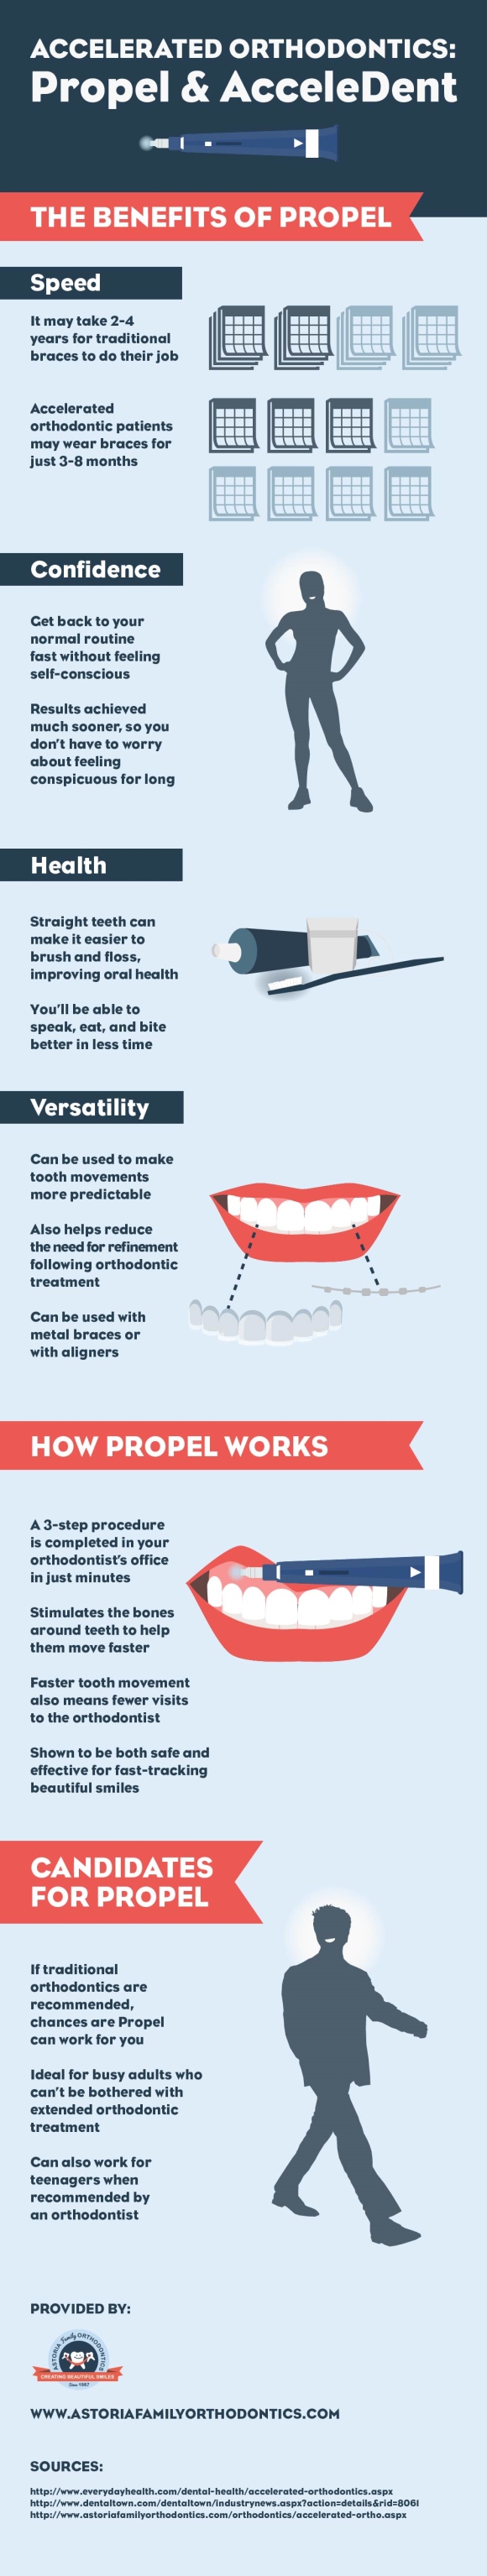 Accelerated Orthodontics: Propel & AcceleDent | Visual.ly